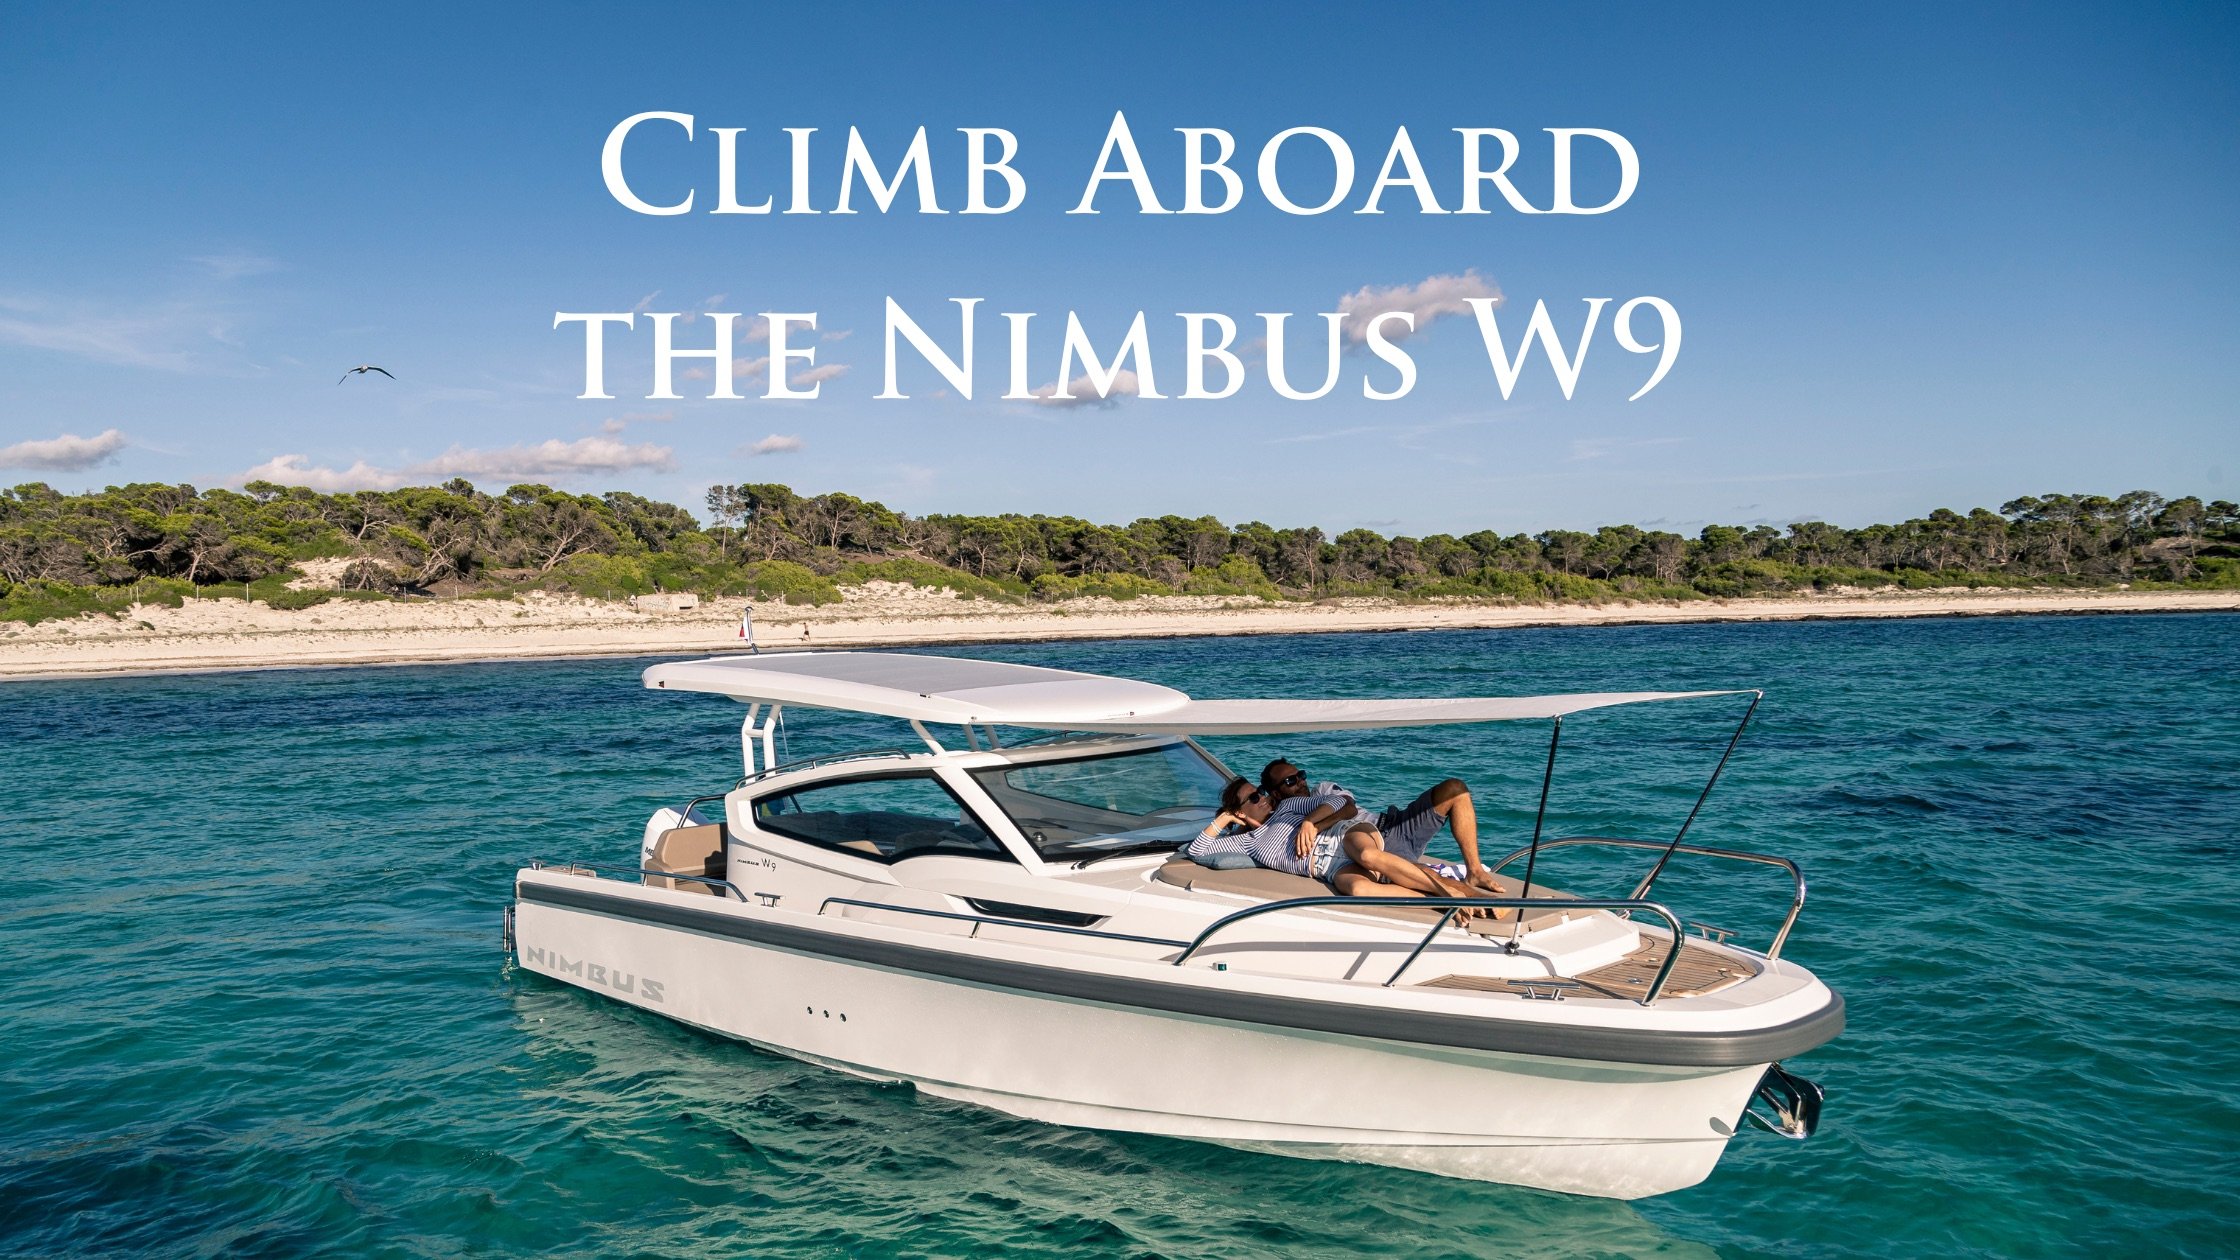 Nimble by Nature: Agility and Comfort Aboard the Nimbus W9